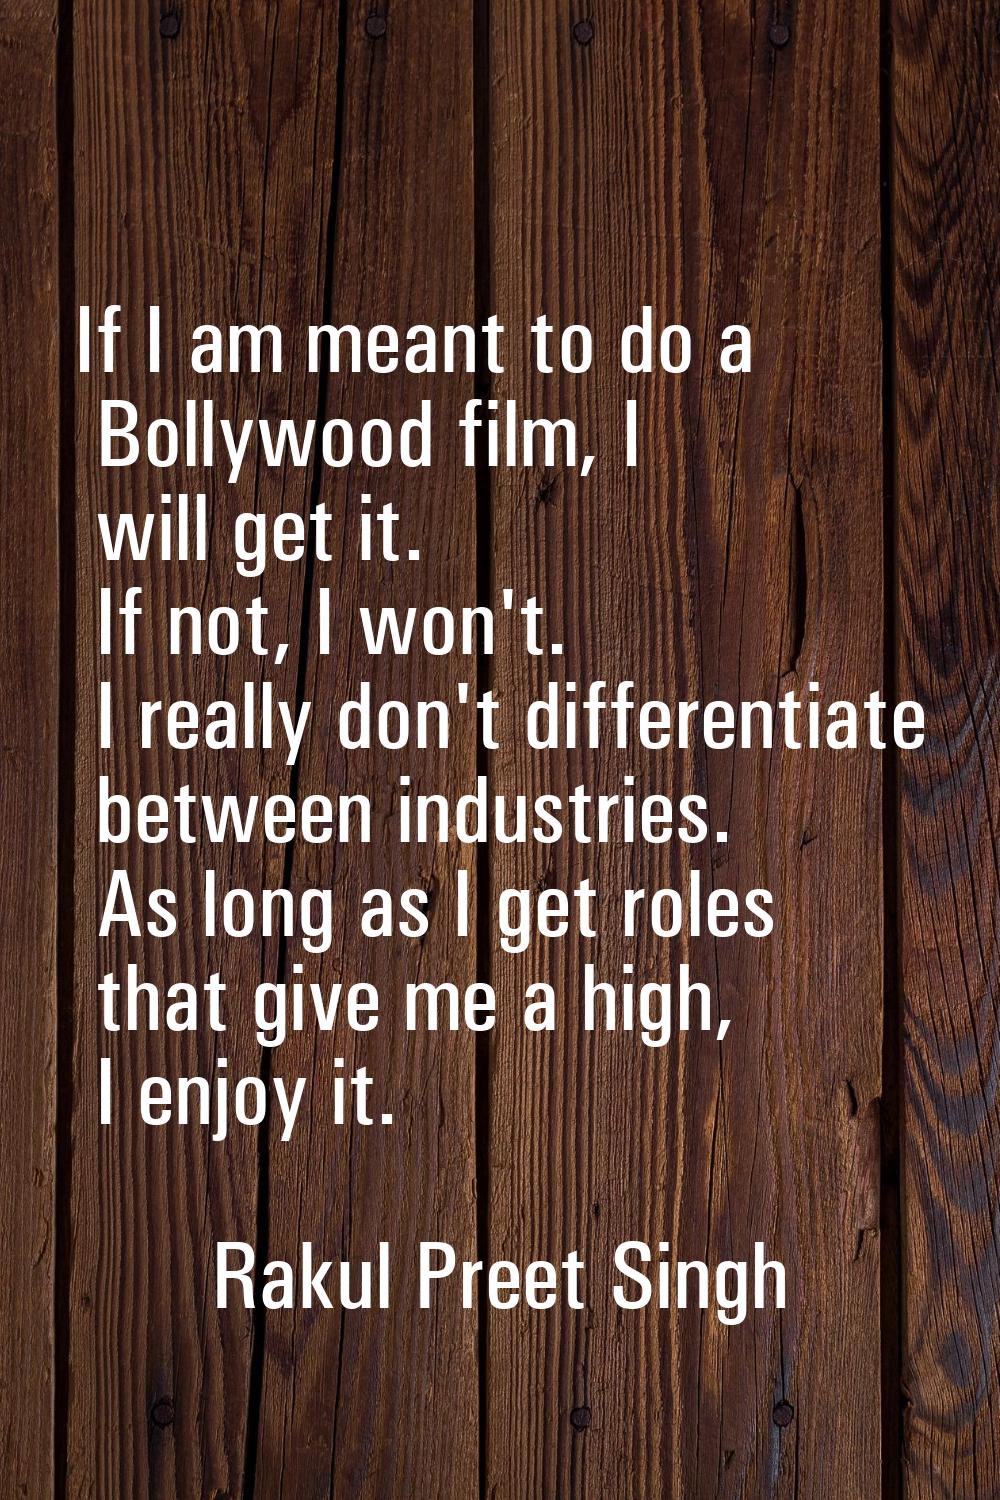 If I am meant to do a Bollywood film, I will get it. If not, I won't. I really don't differentiate 